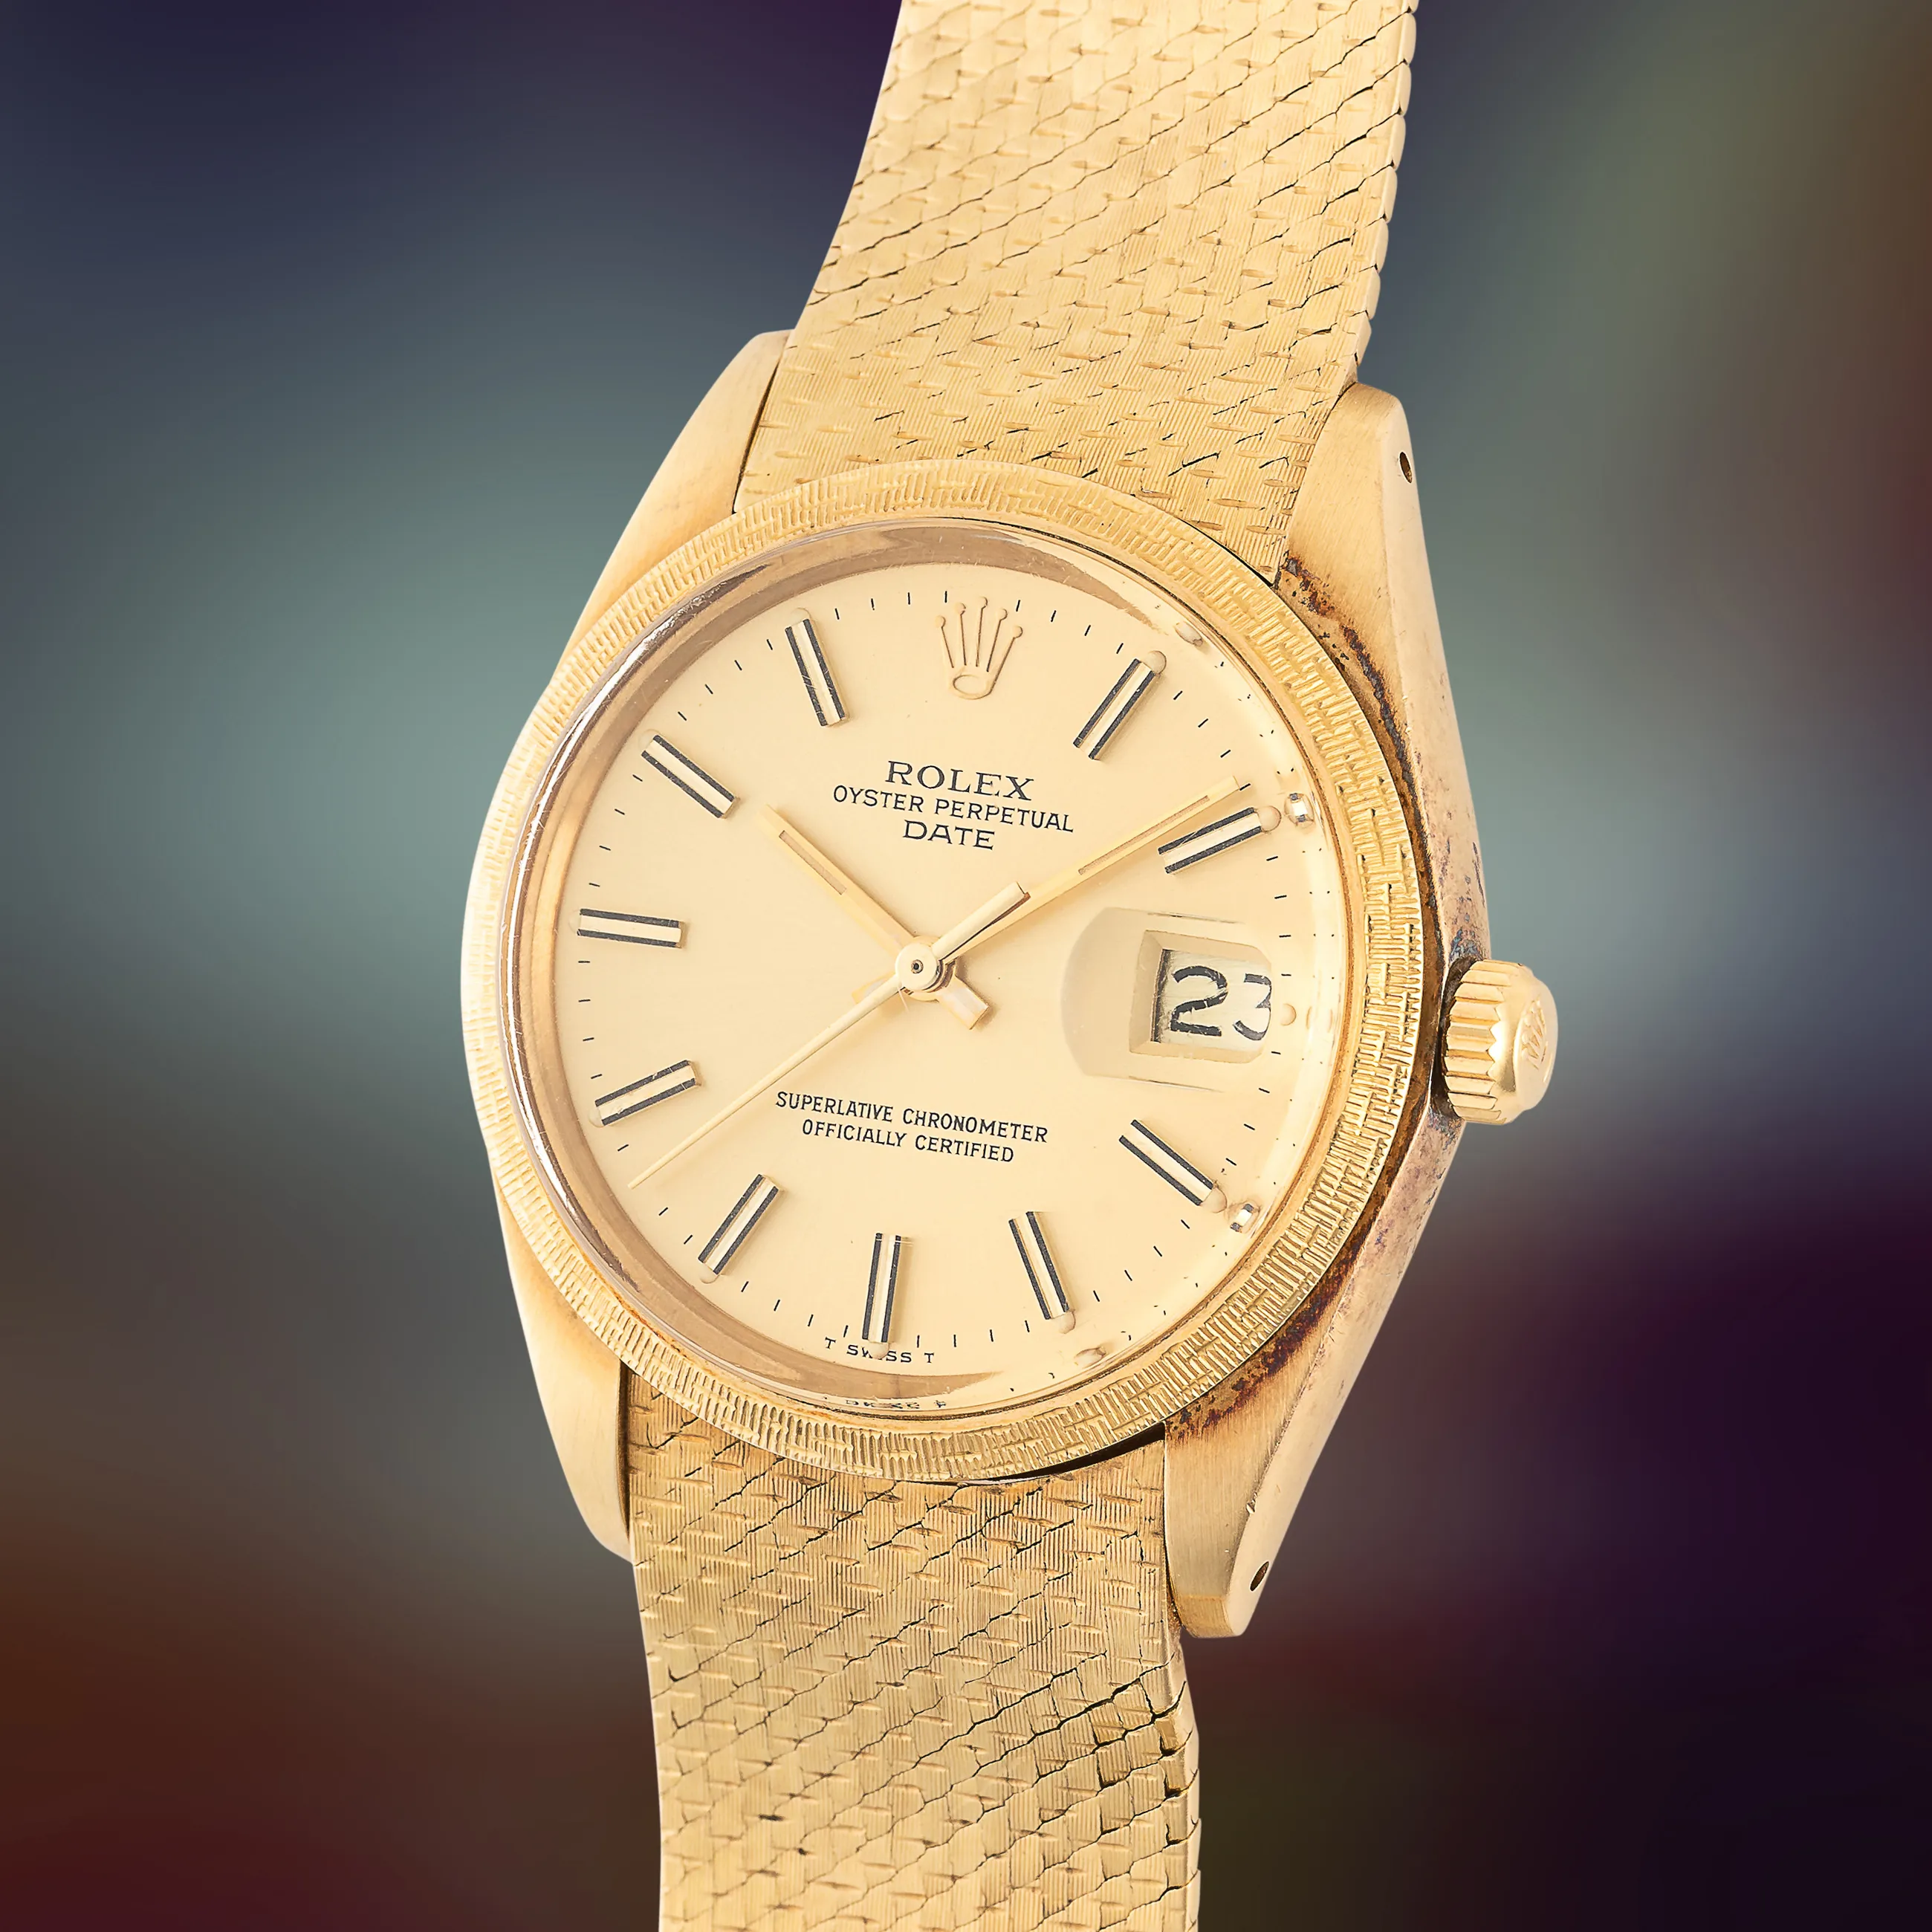 Rolex Oyster Perpetual Date 1514 nullmm